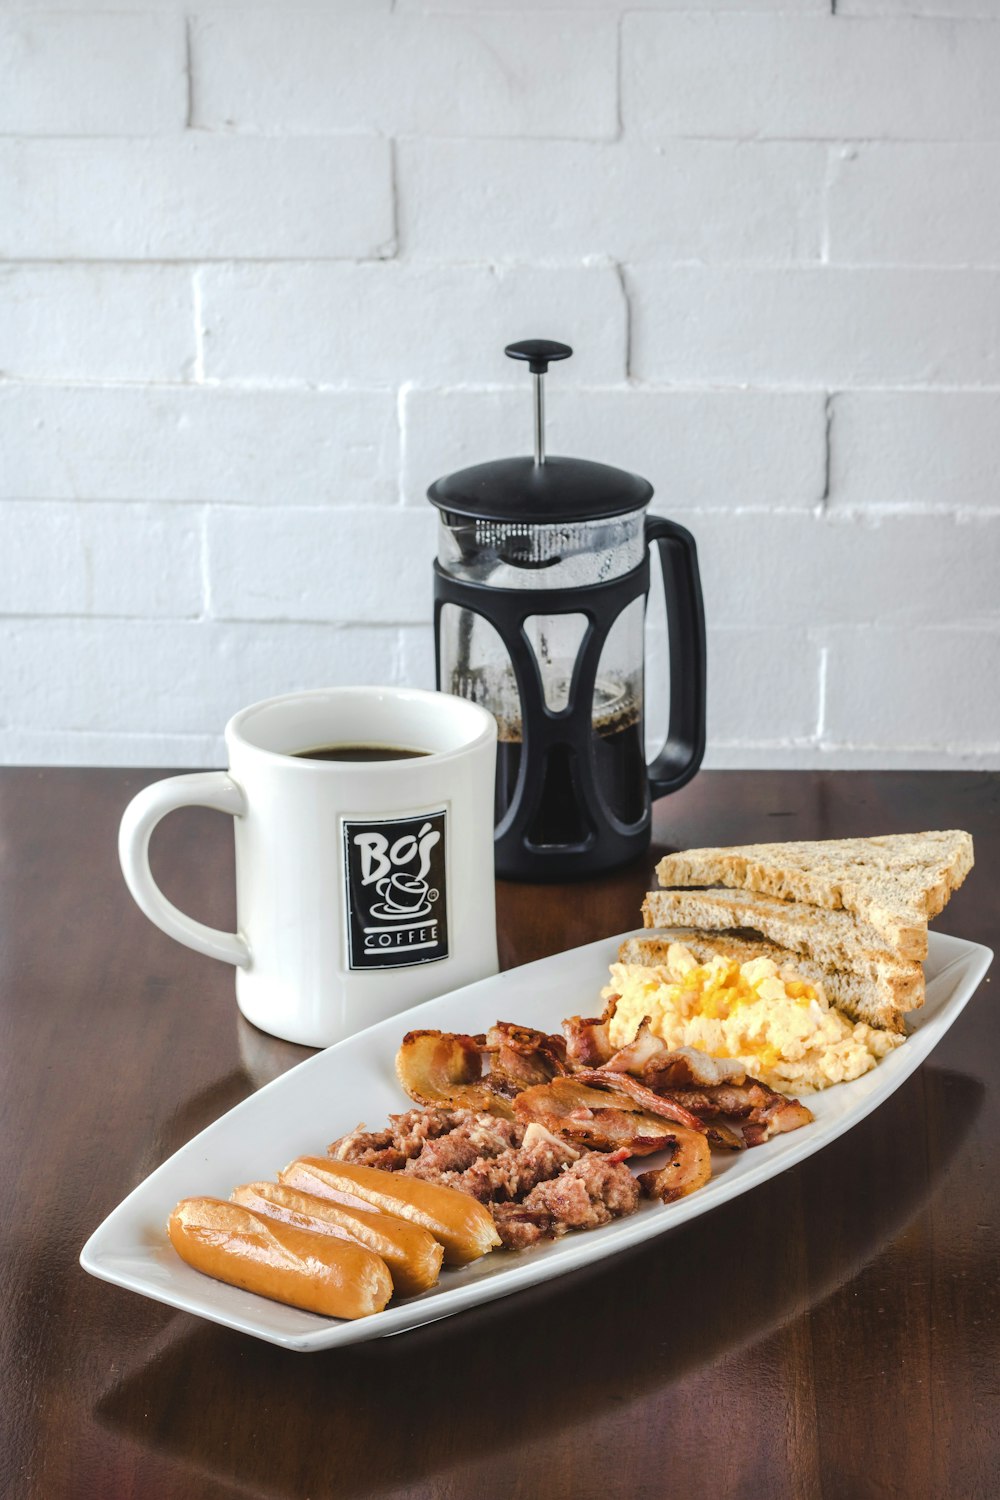 bread and bacon platter beside French press